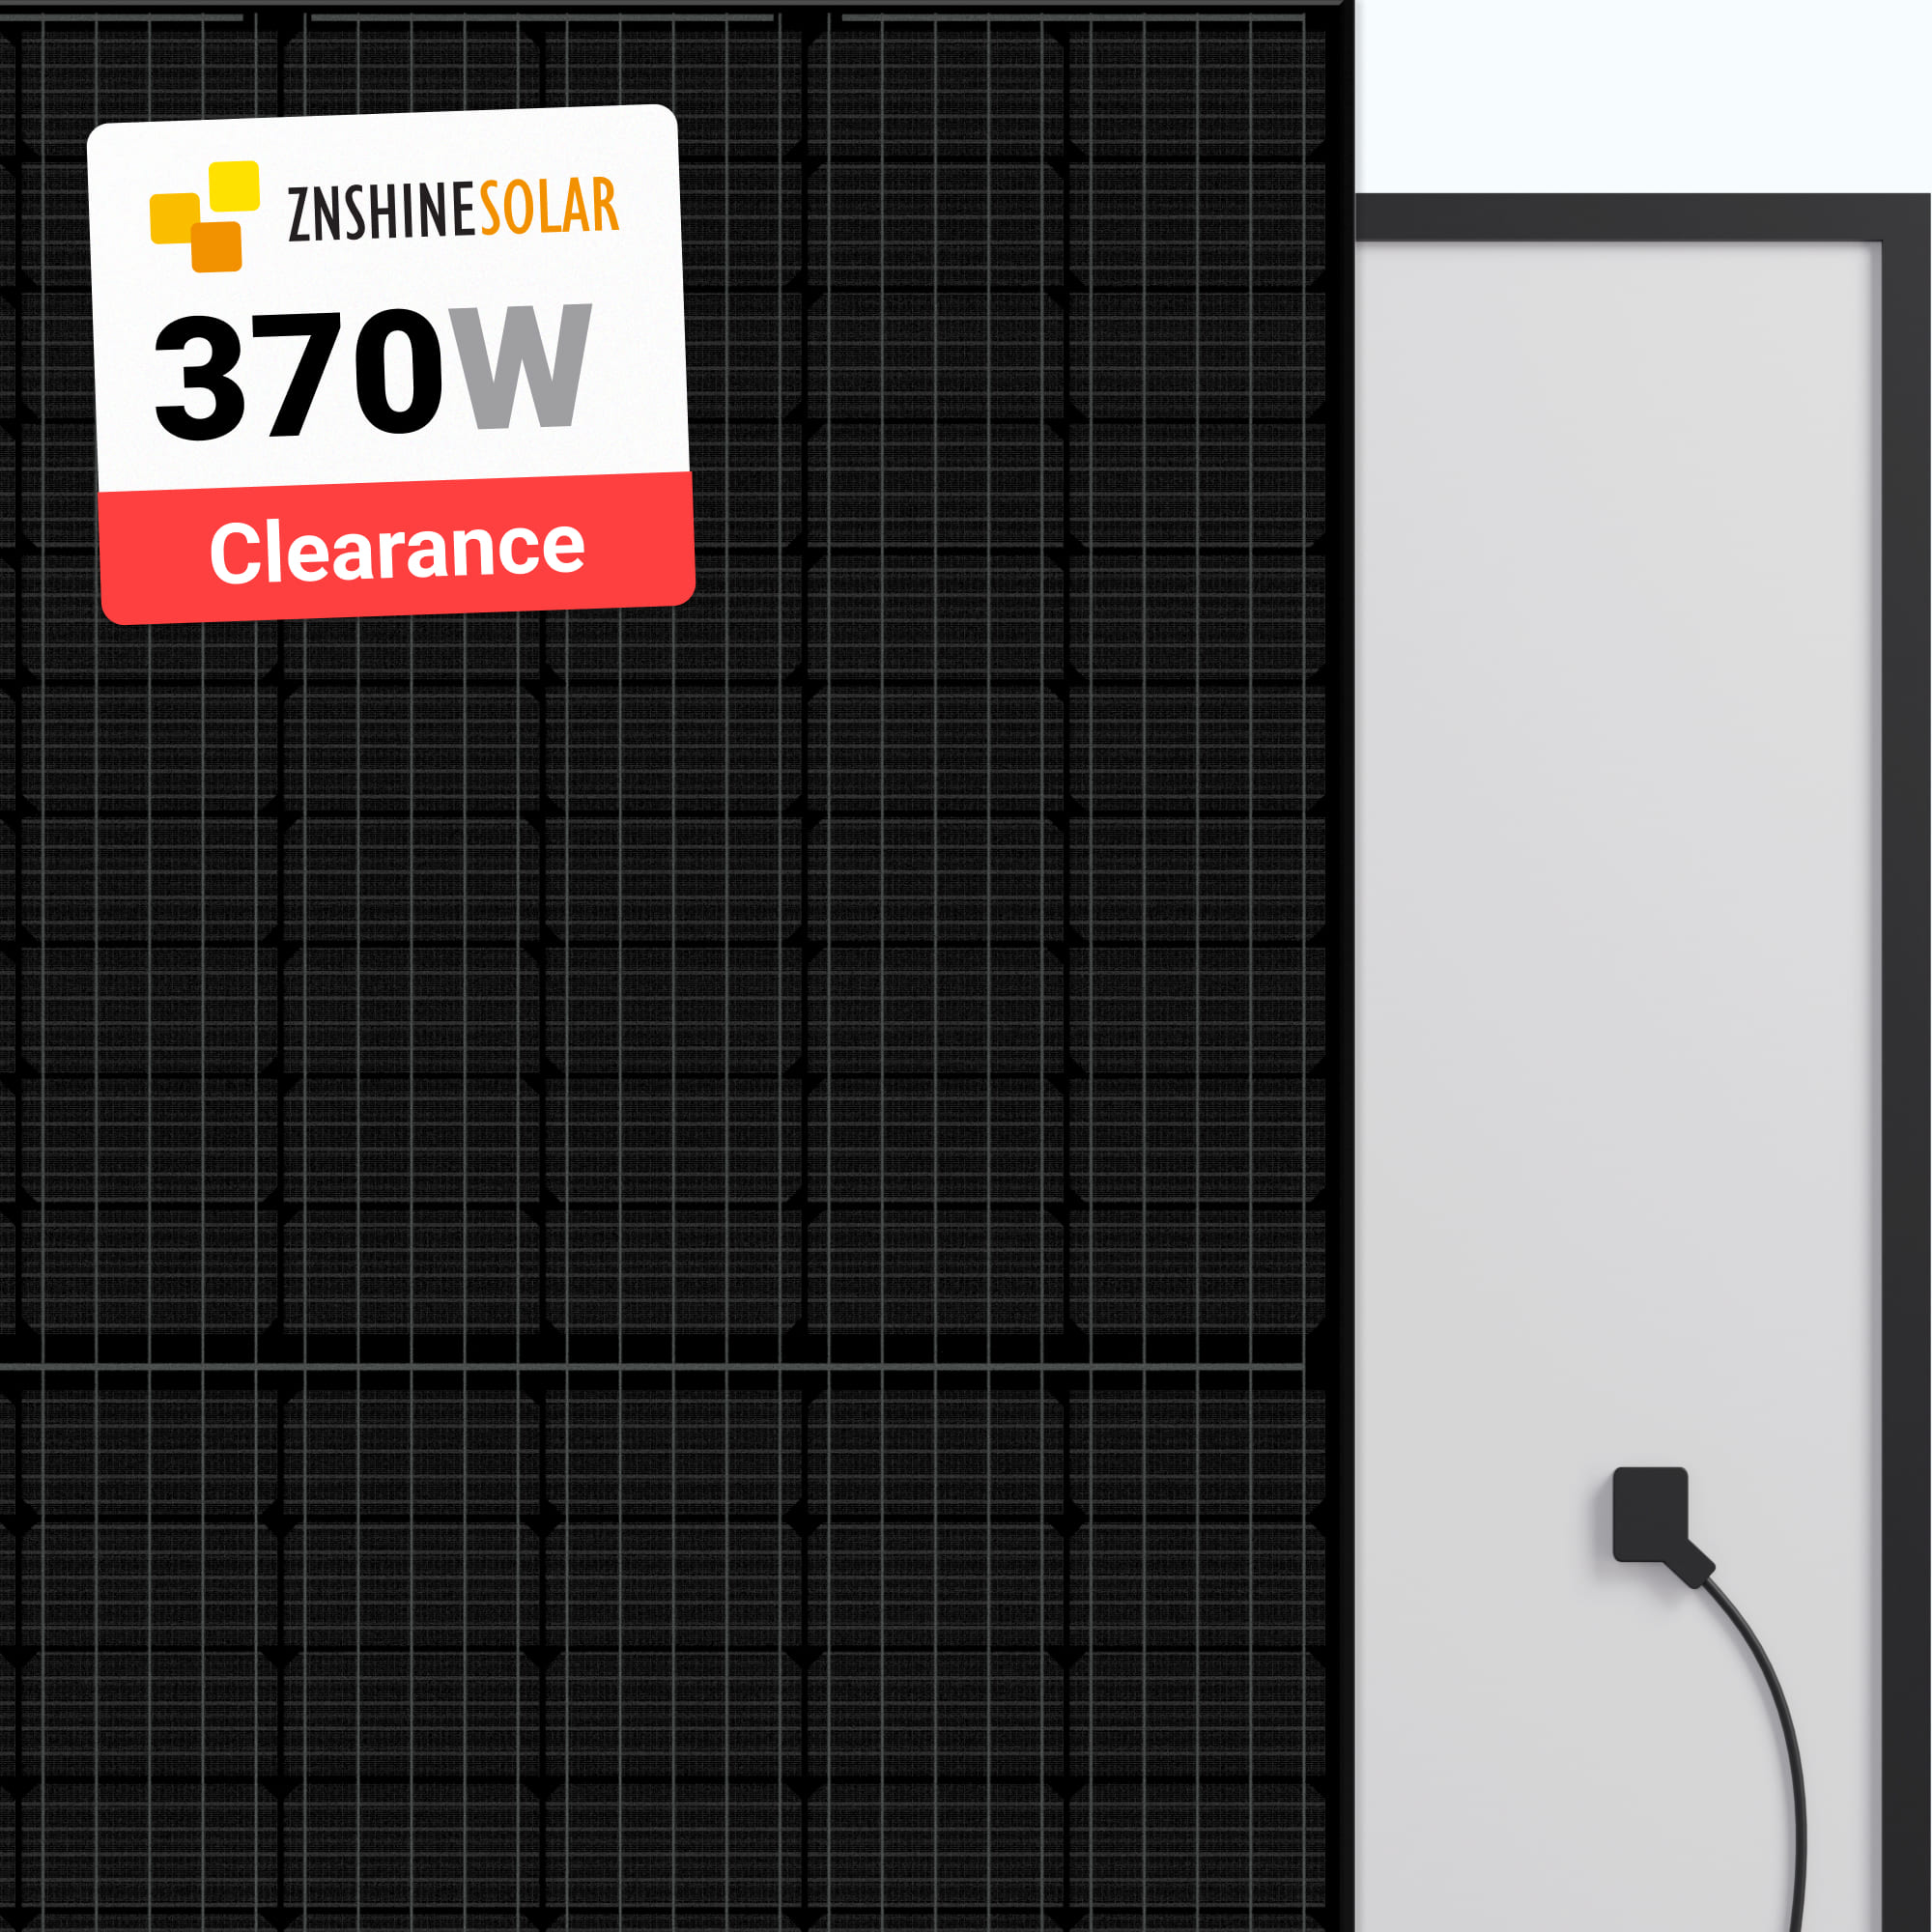 ZNShine Solar 370W Solar Panel 120 Cell ZXM6-NH120-370/M All-Black  Clearance - A1SolarStore